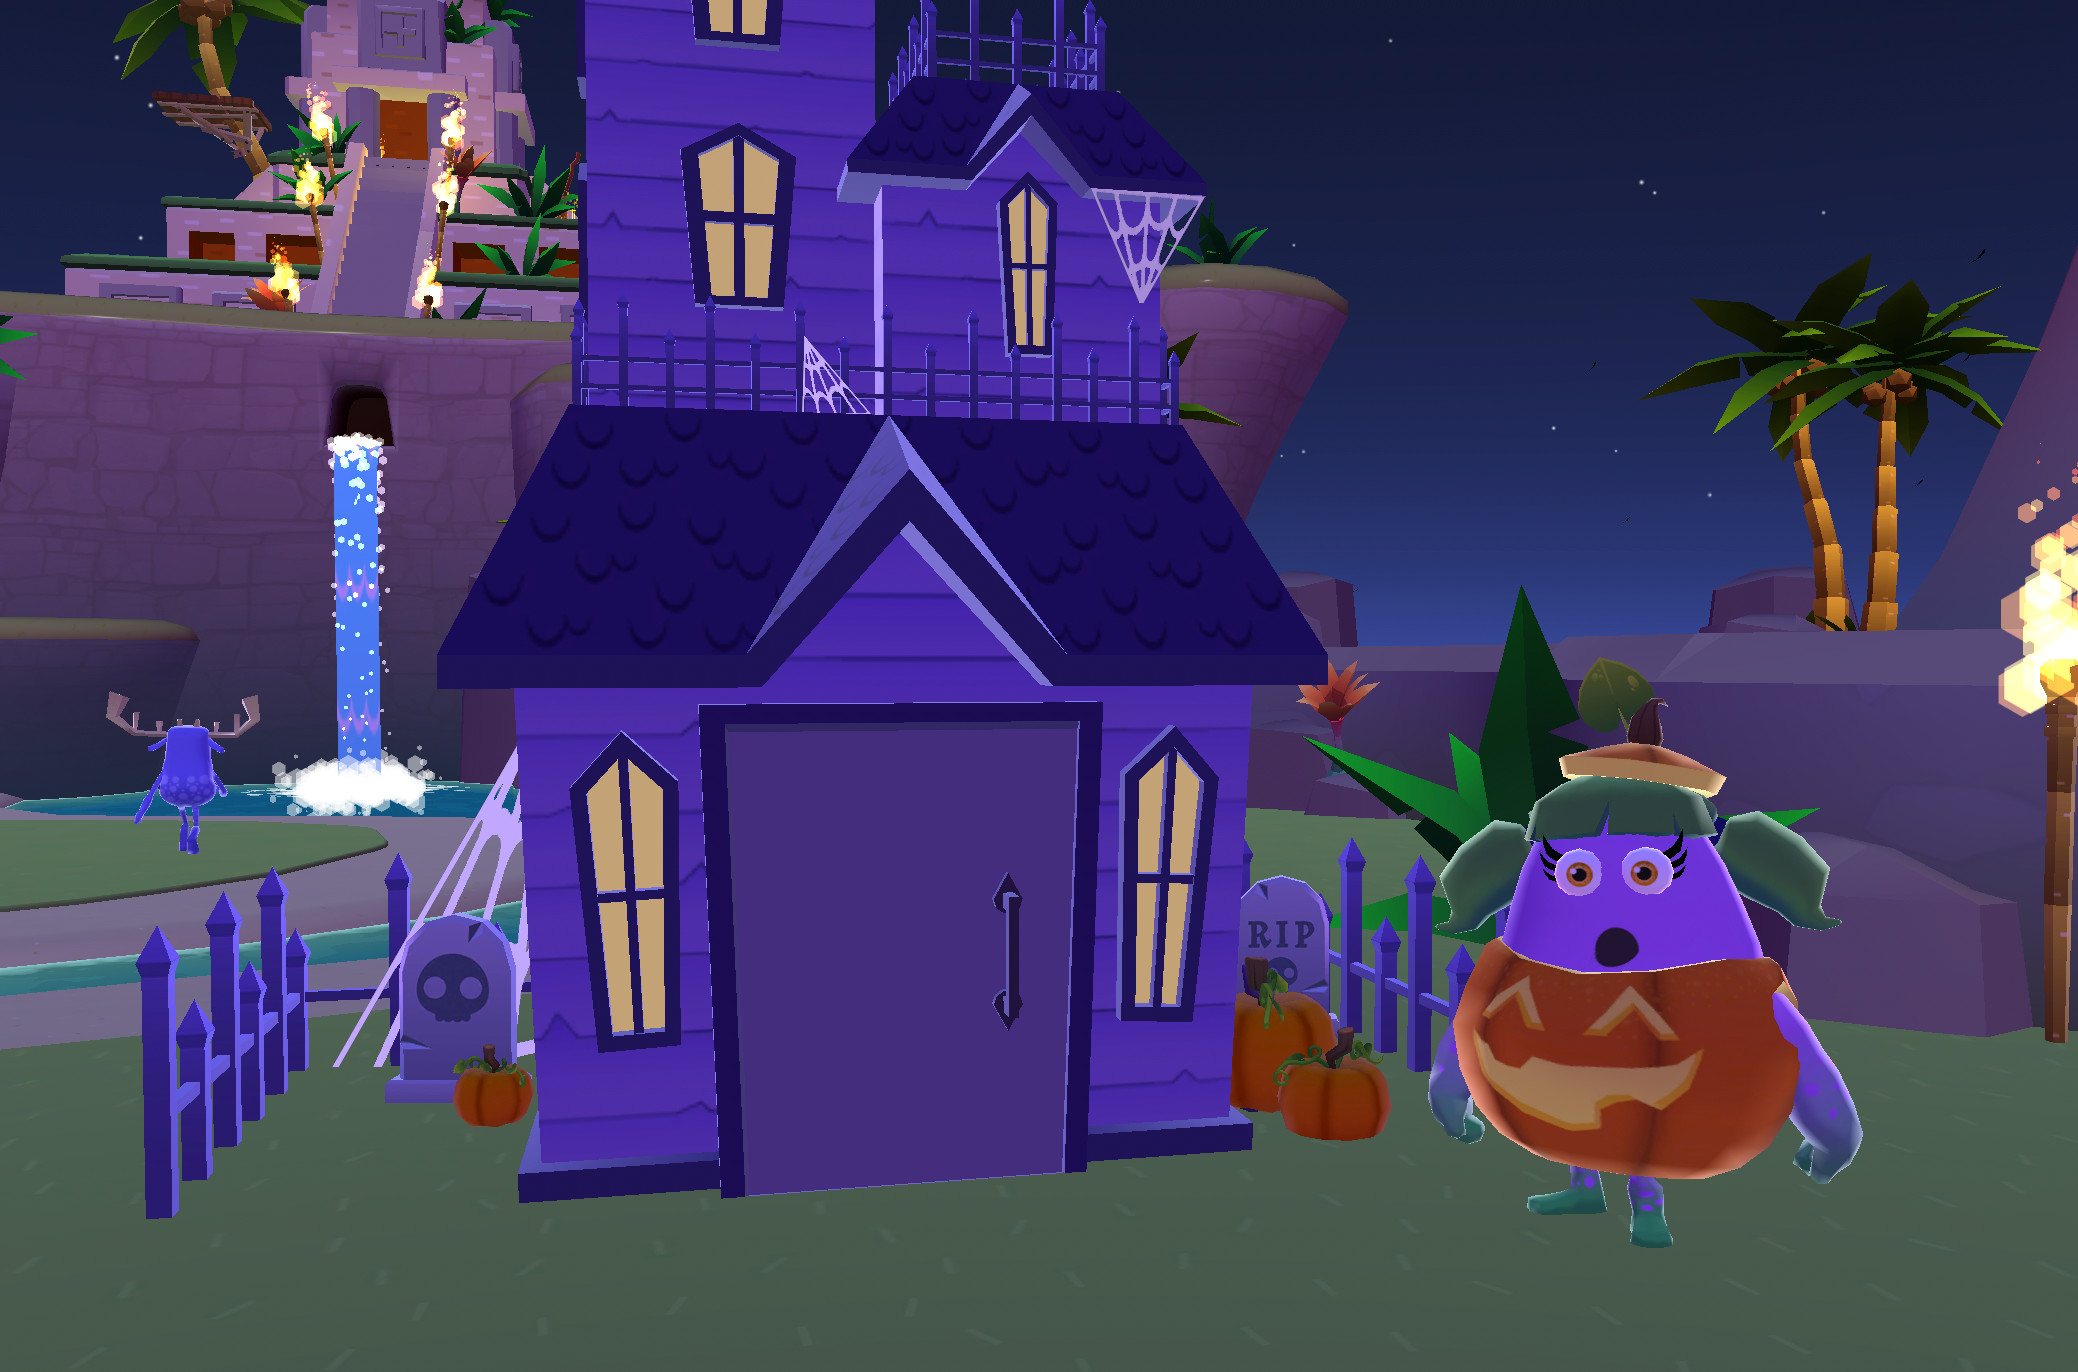 Jackie Lantern preparing to go into the creepy mansion! This update added spooky night time lighting to the normally bright island.